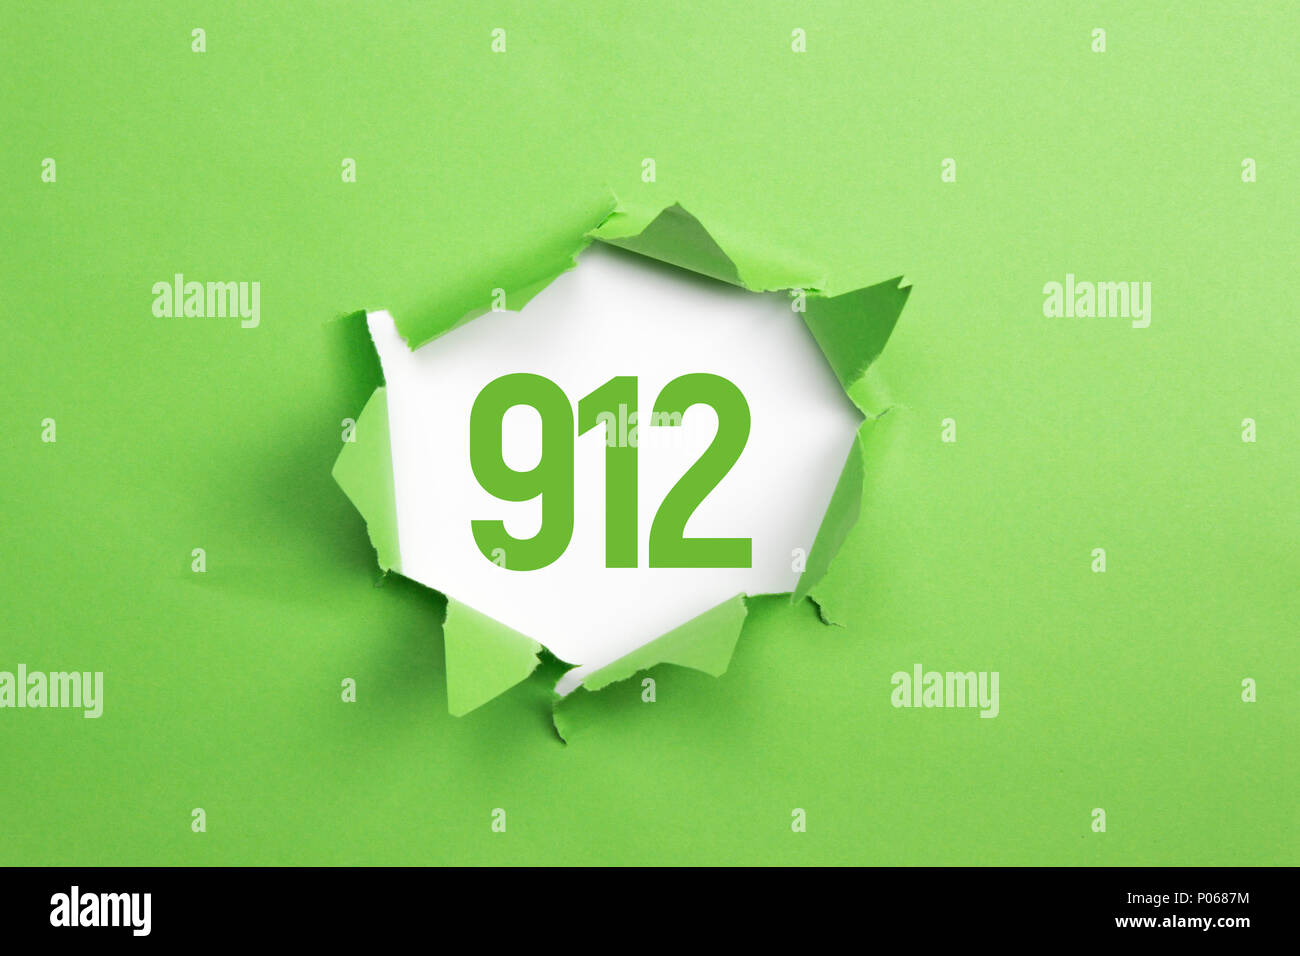 Green Number 912 on green paper background Stock Photo - Alamy